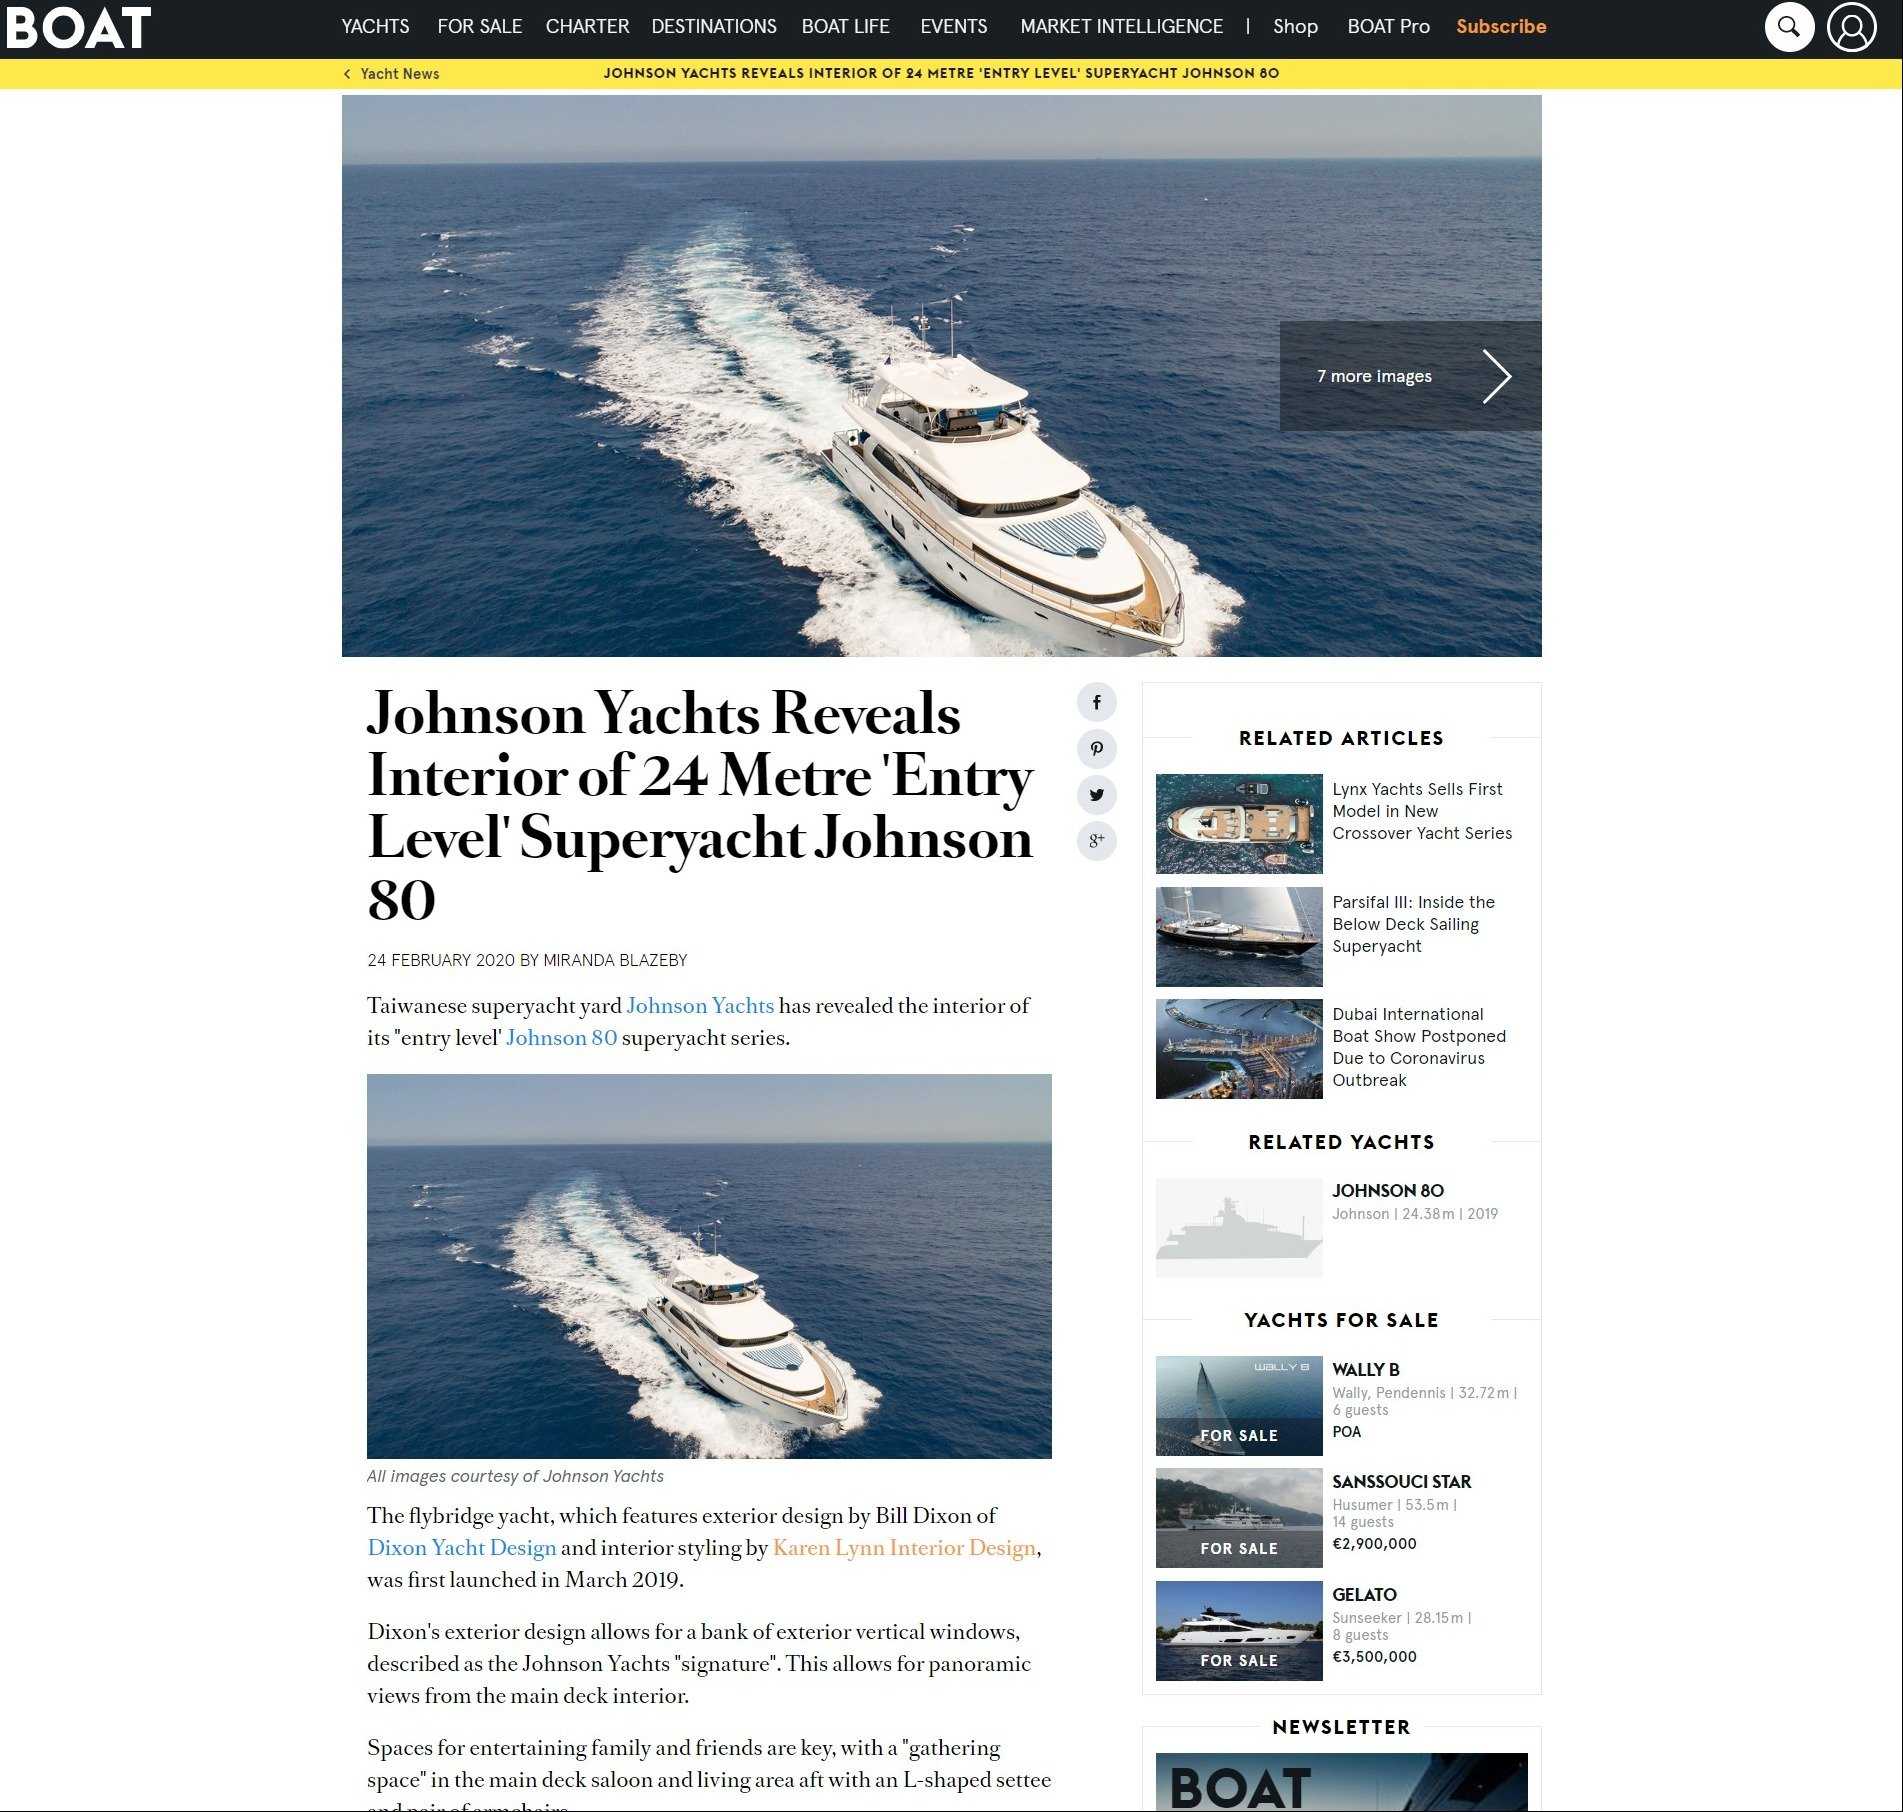 BoatInternational Johnson80 - Karen Lynn Interiors - Interior Design for Yacht, Aircrafts and Residential Projects